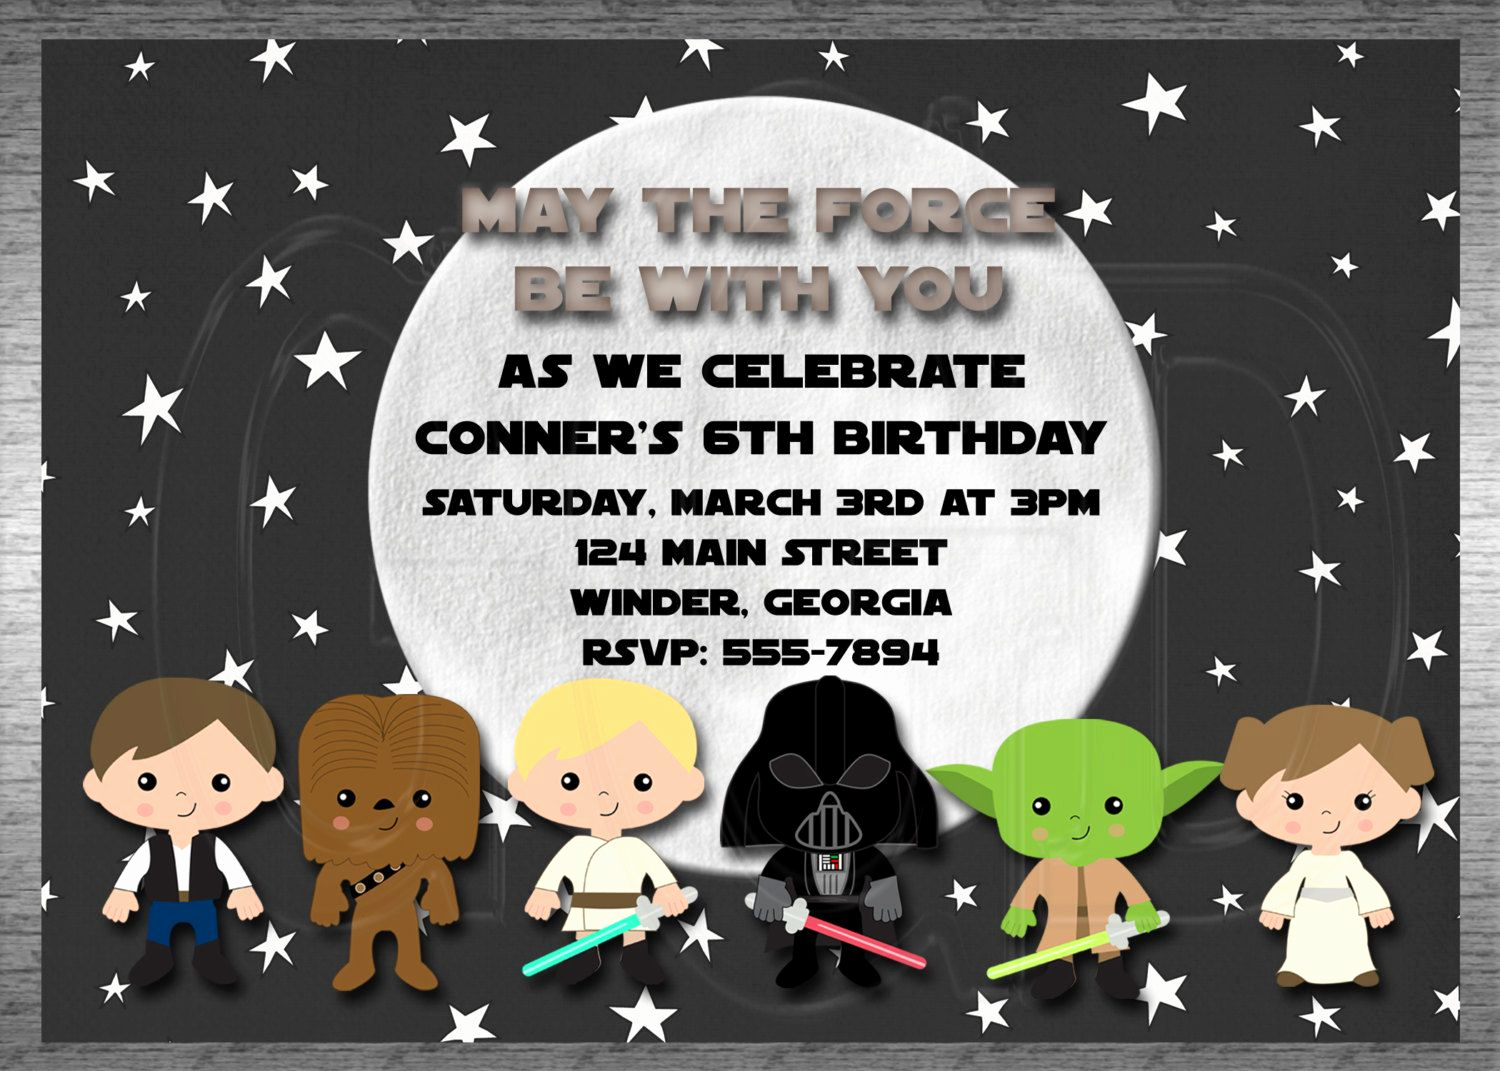 Free Star Wars Invitation Template Awesome Galaxy Star Wars Invitation Star Wars Birthday Party